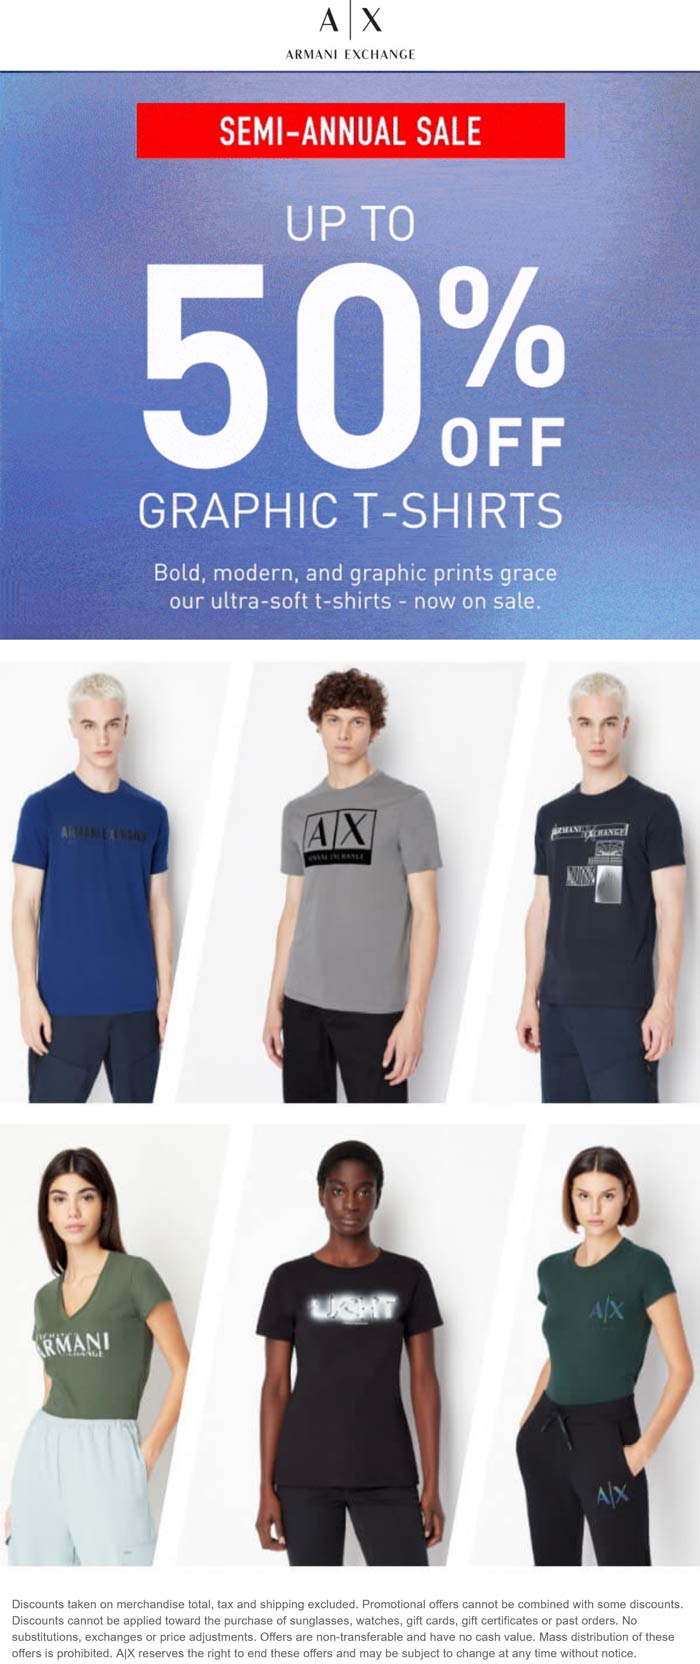 Armani Exchange stores Coupon  50% off various graphic shirts at Armani Exchange #armaniexchange 